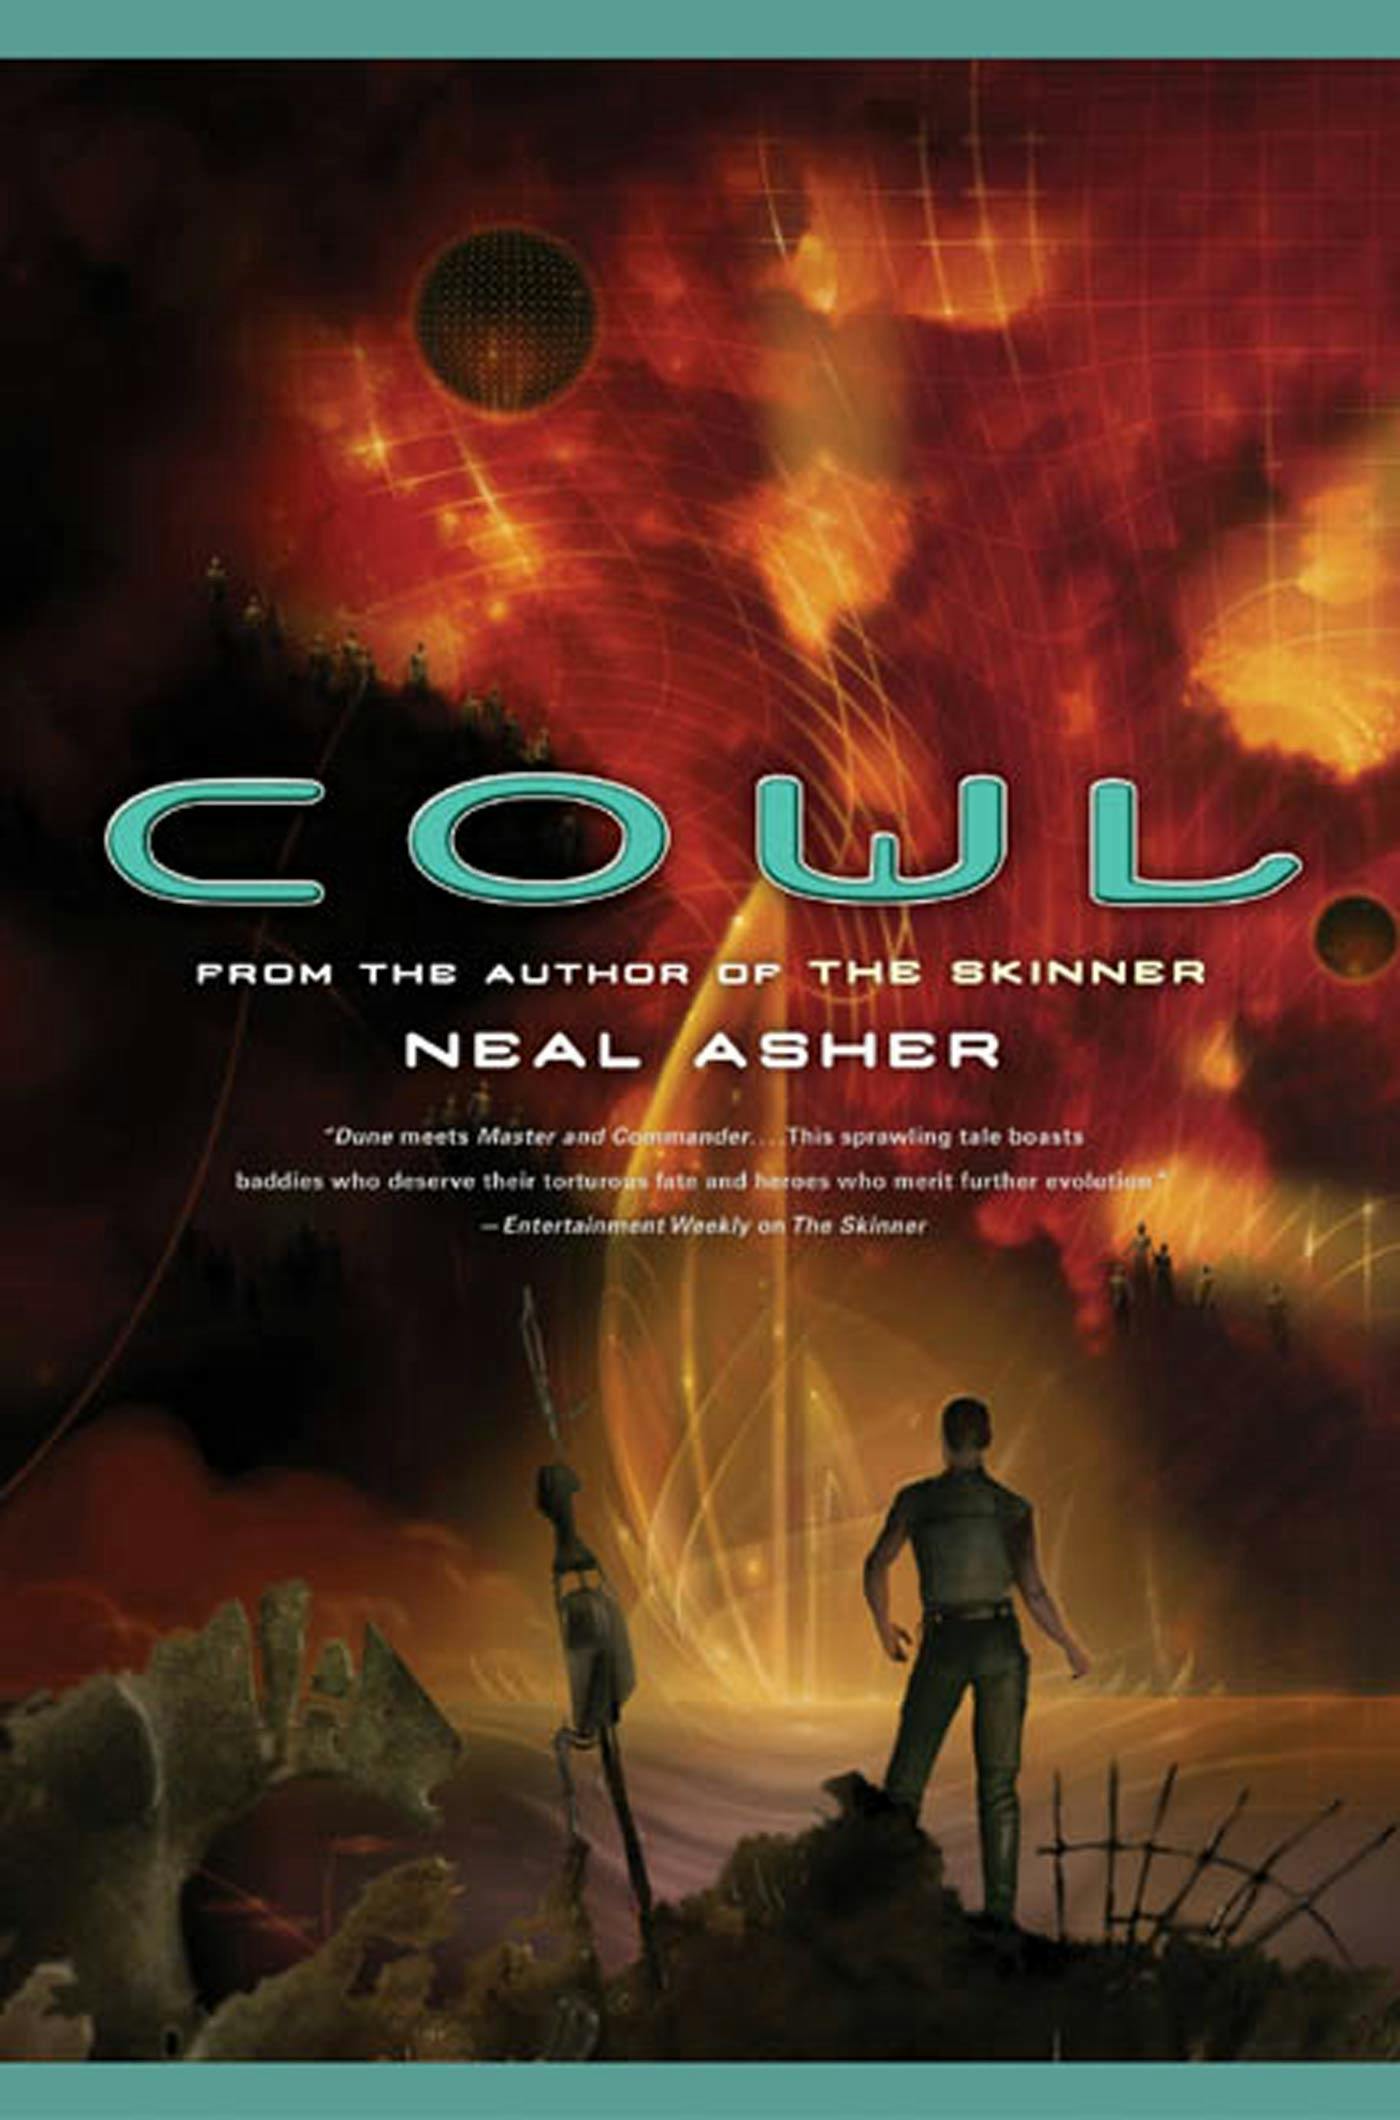 Cover for the book titled as: Cowl